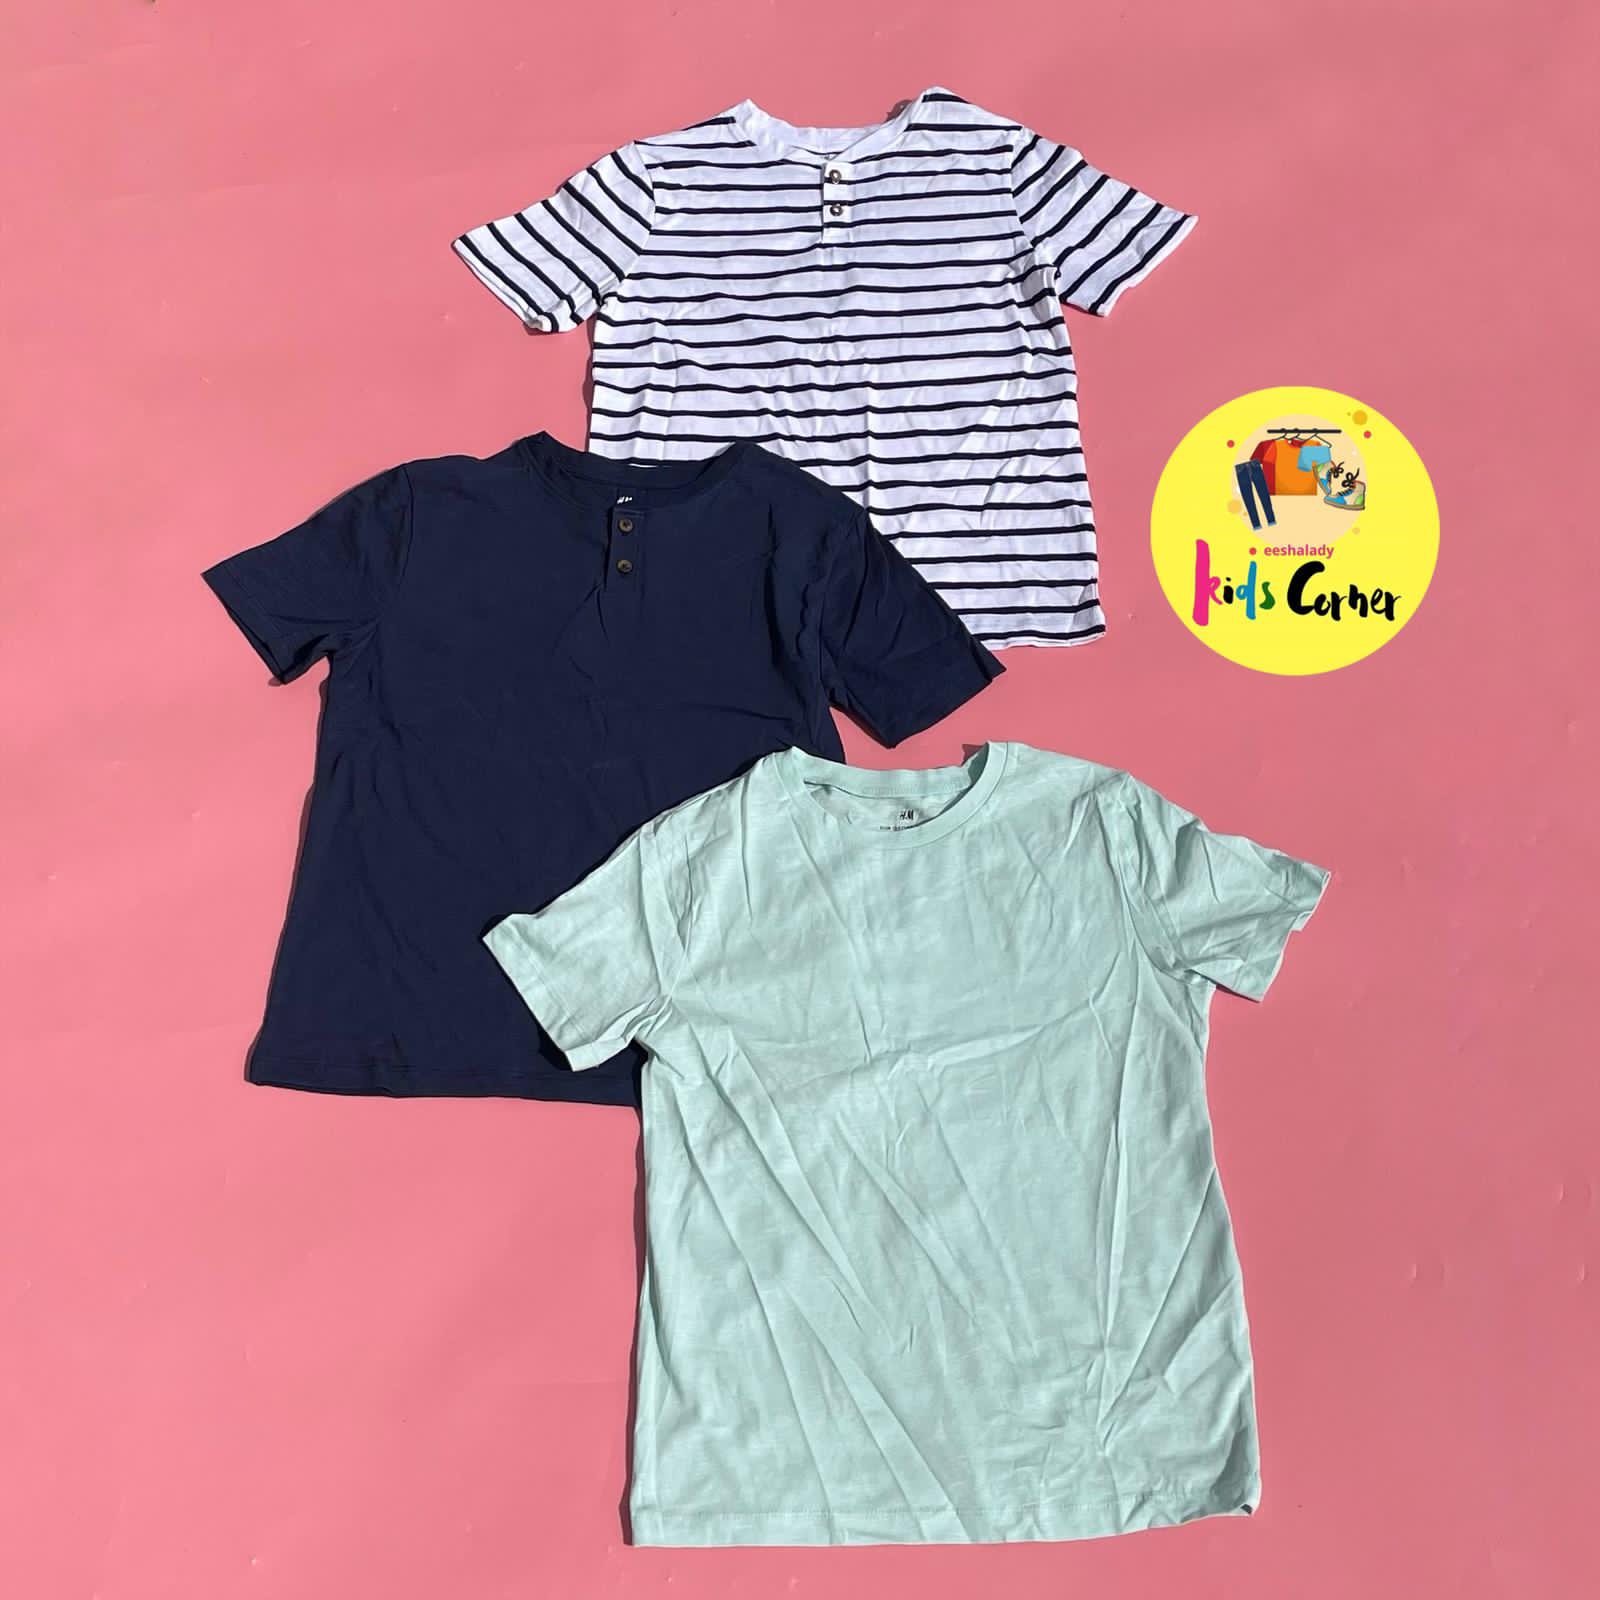 H&M Tee – 3in1